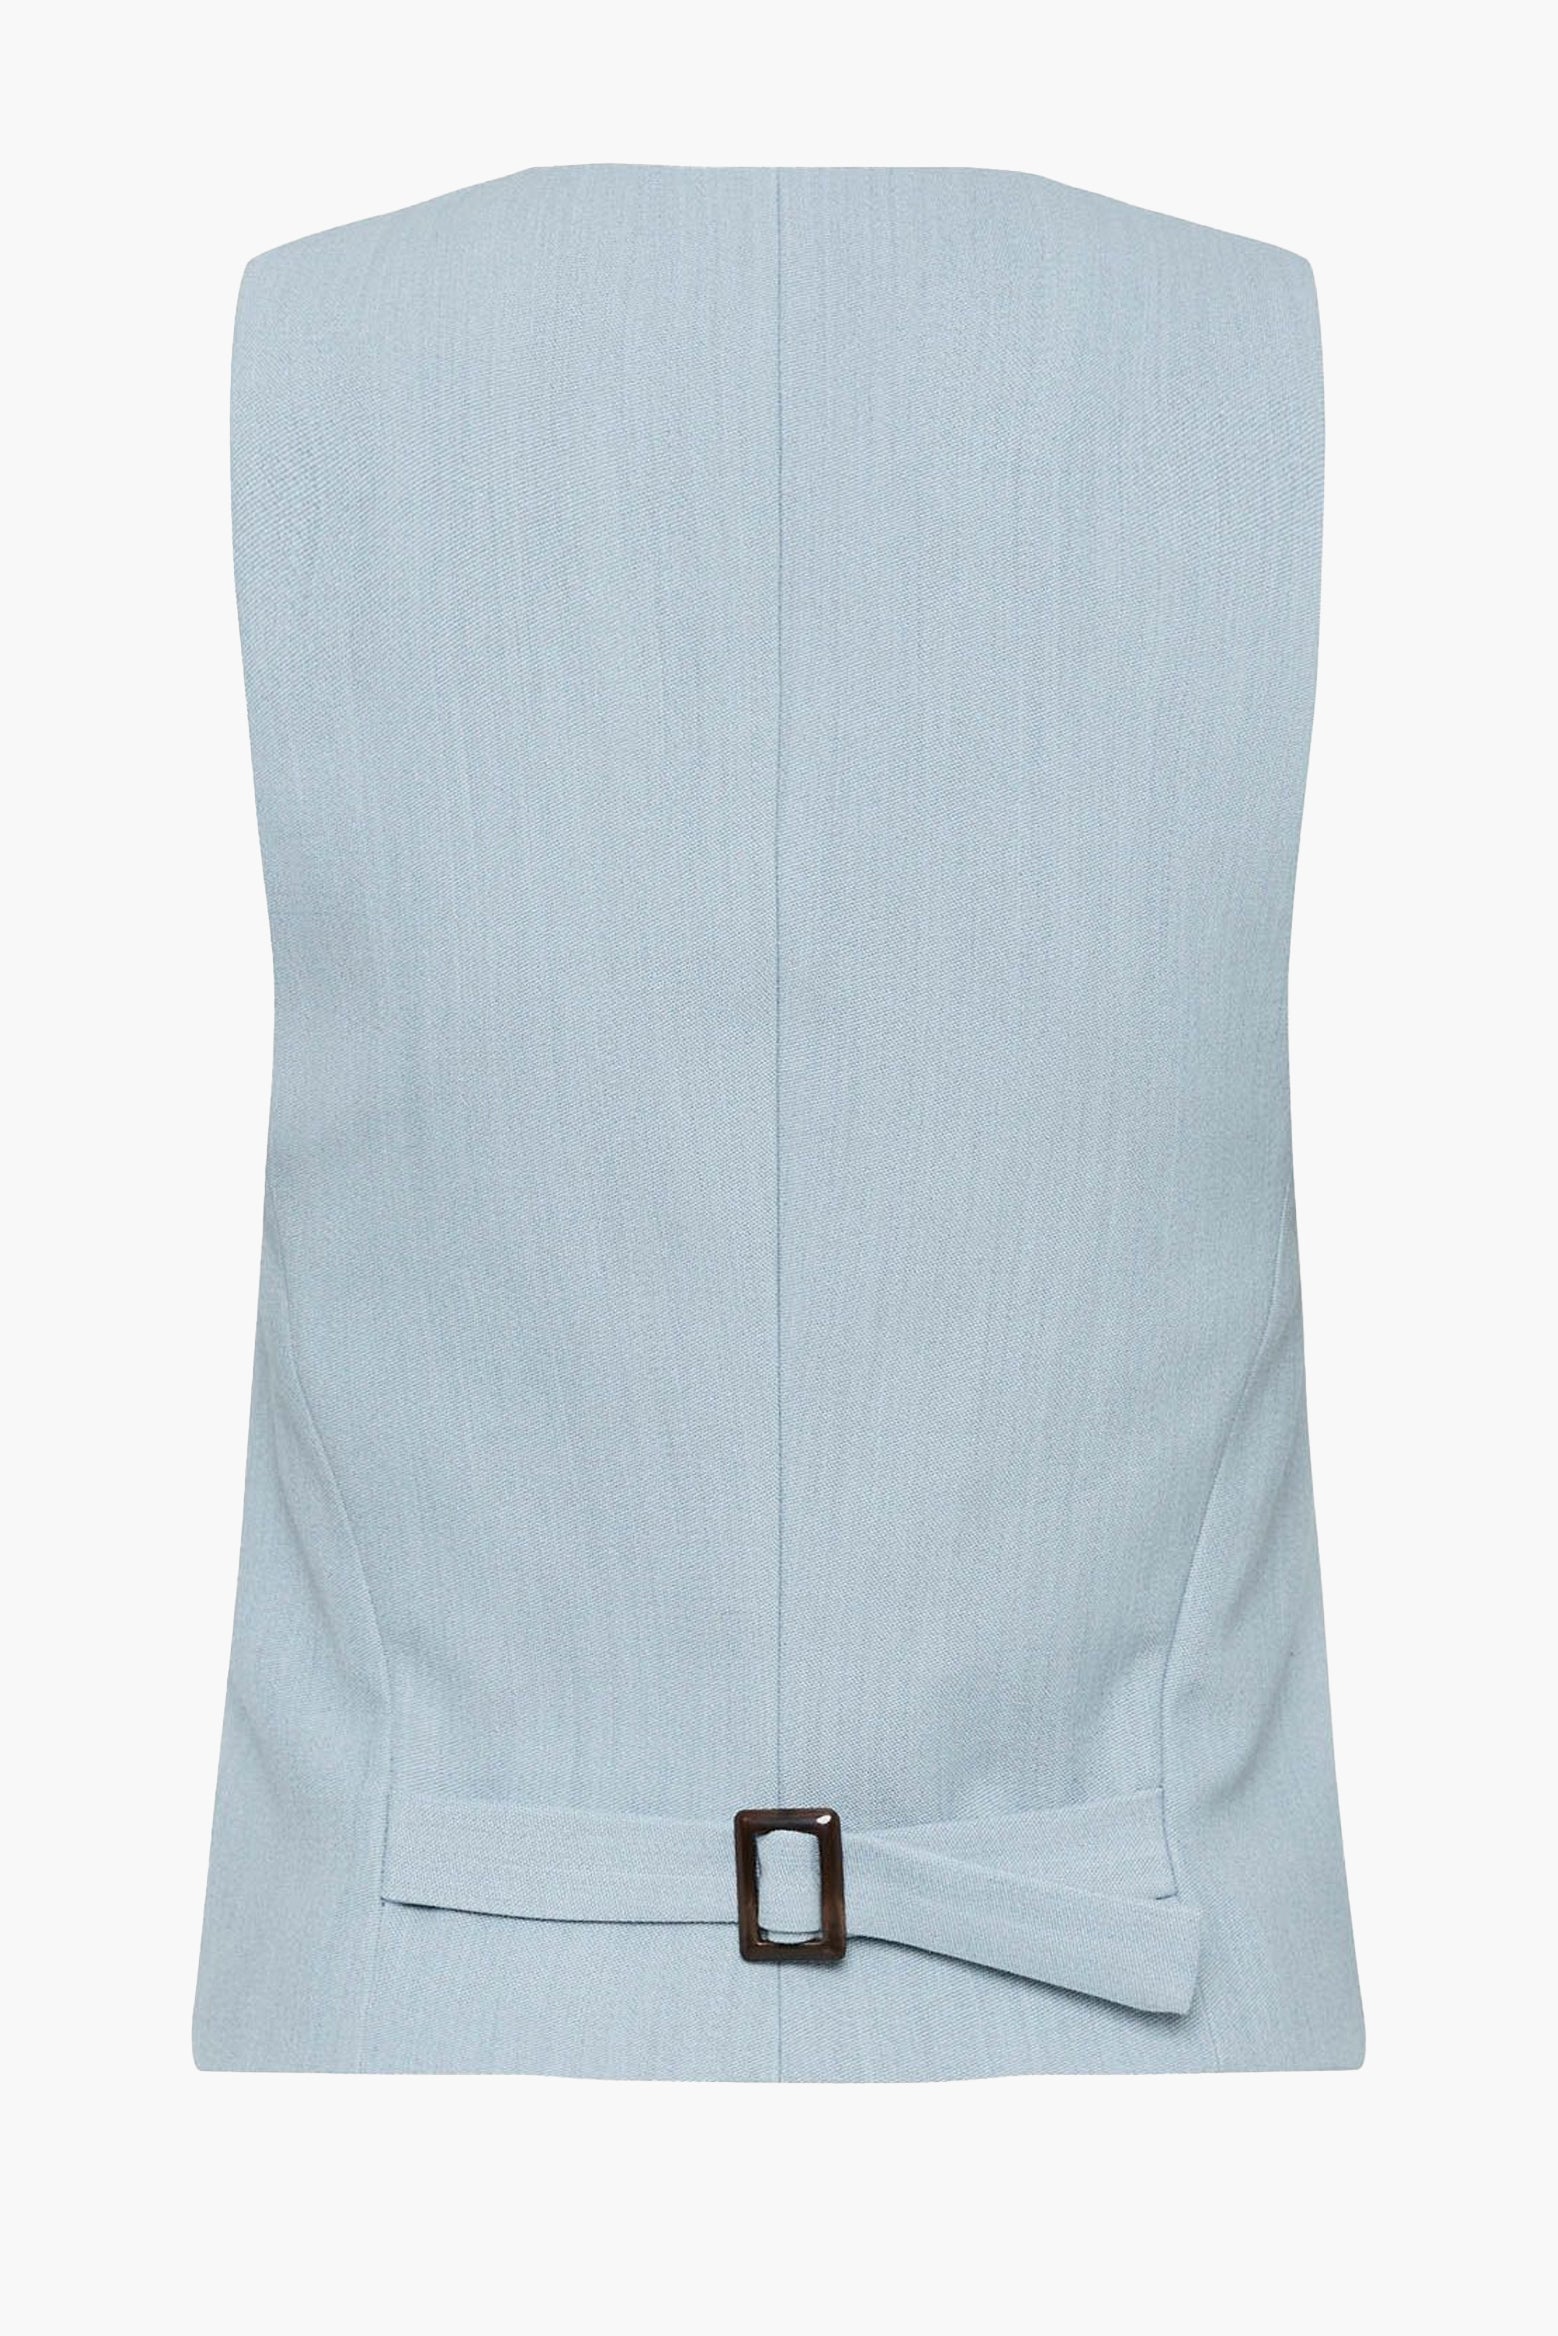 The ST. AGNI Carter Vest in Stone Blue from The New Trend.